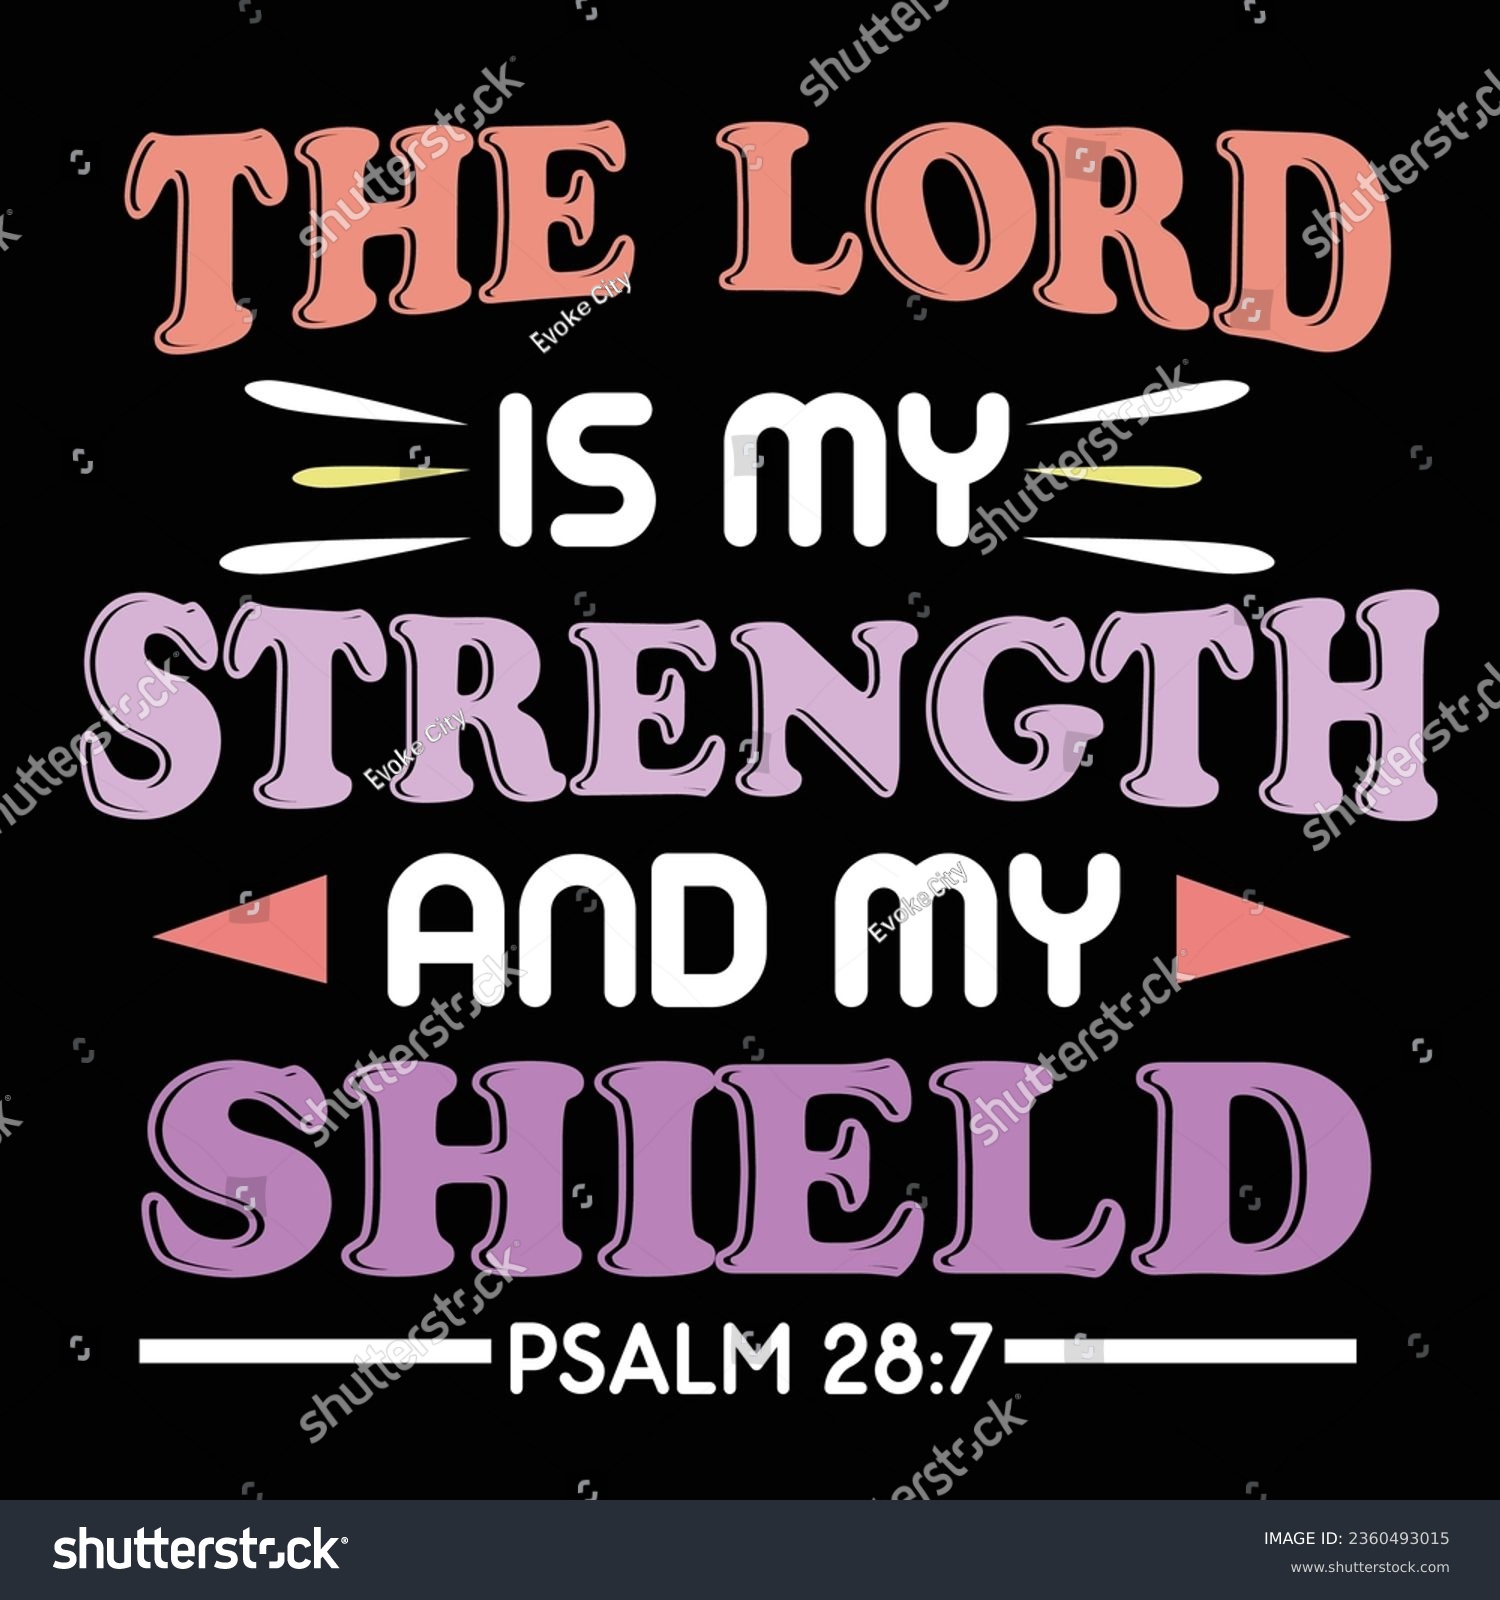 SVG of bible verse psalms Lord shield christian quote svg svg